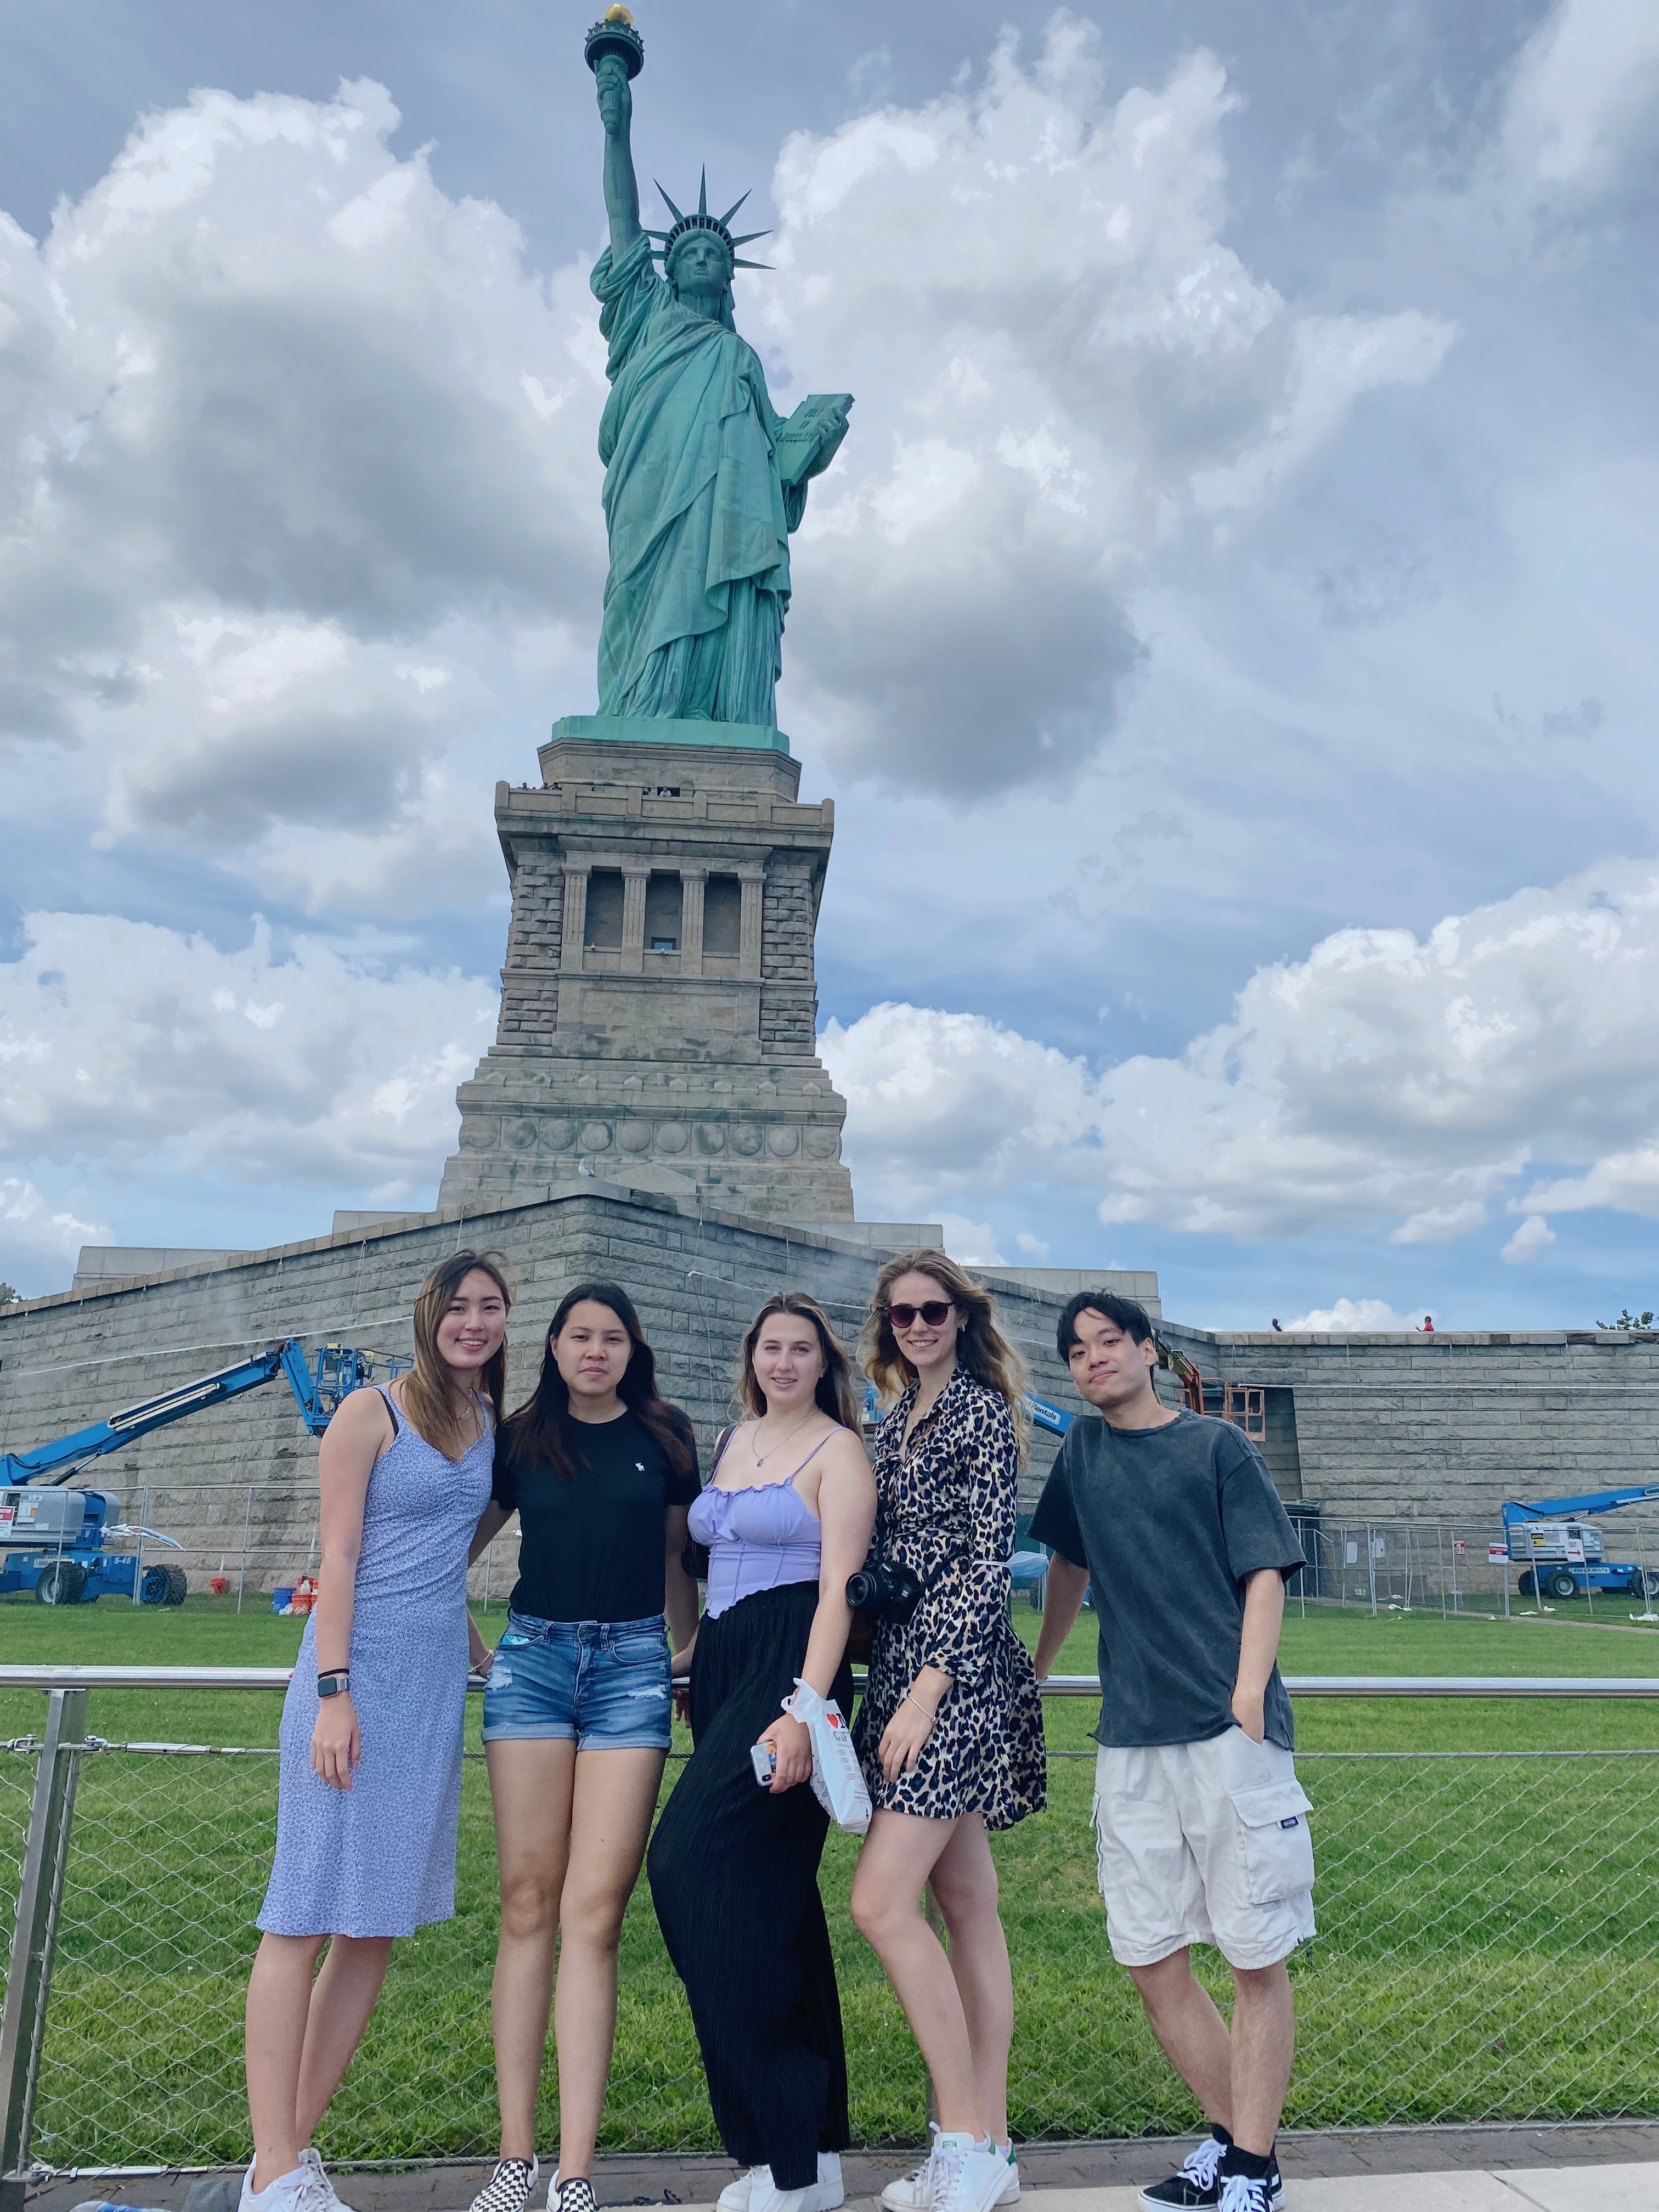 Miss Fung Tsz Ching, a third-year GLA student, and international students during their exchange in the US.